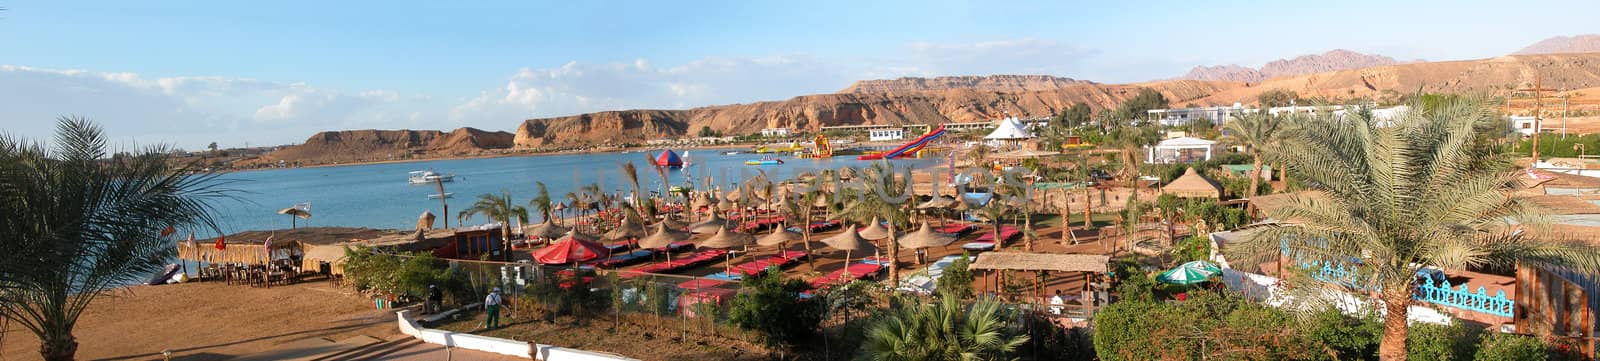 Sharm el Sheikh - Panoramic view of beach and mountains - Egypt